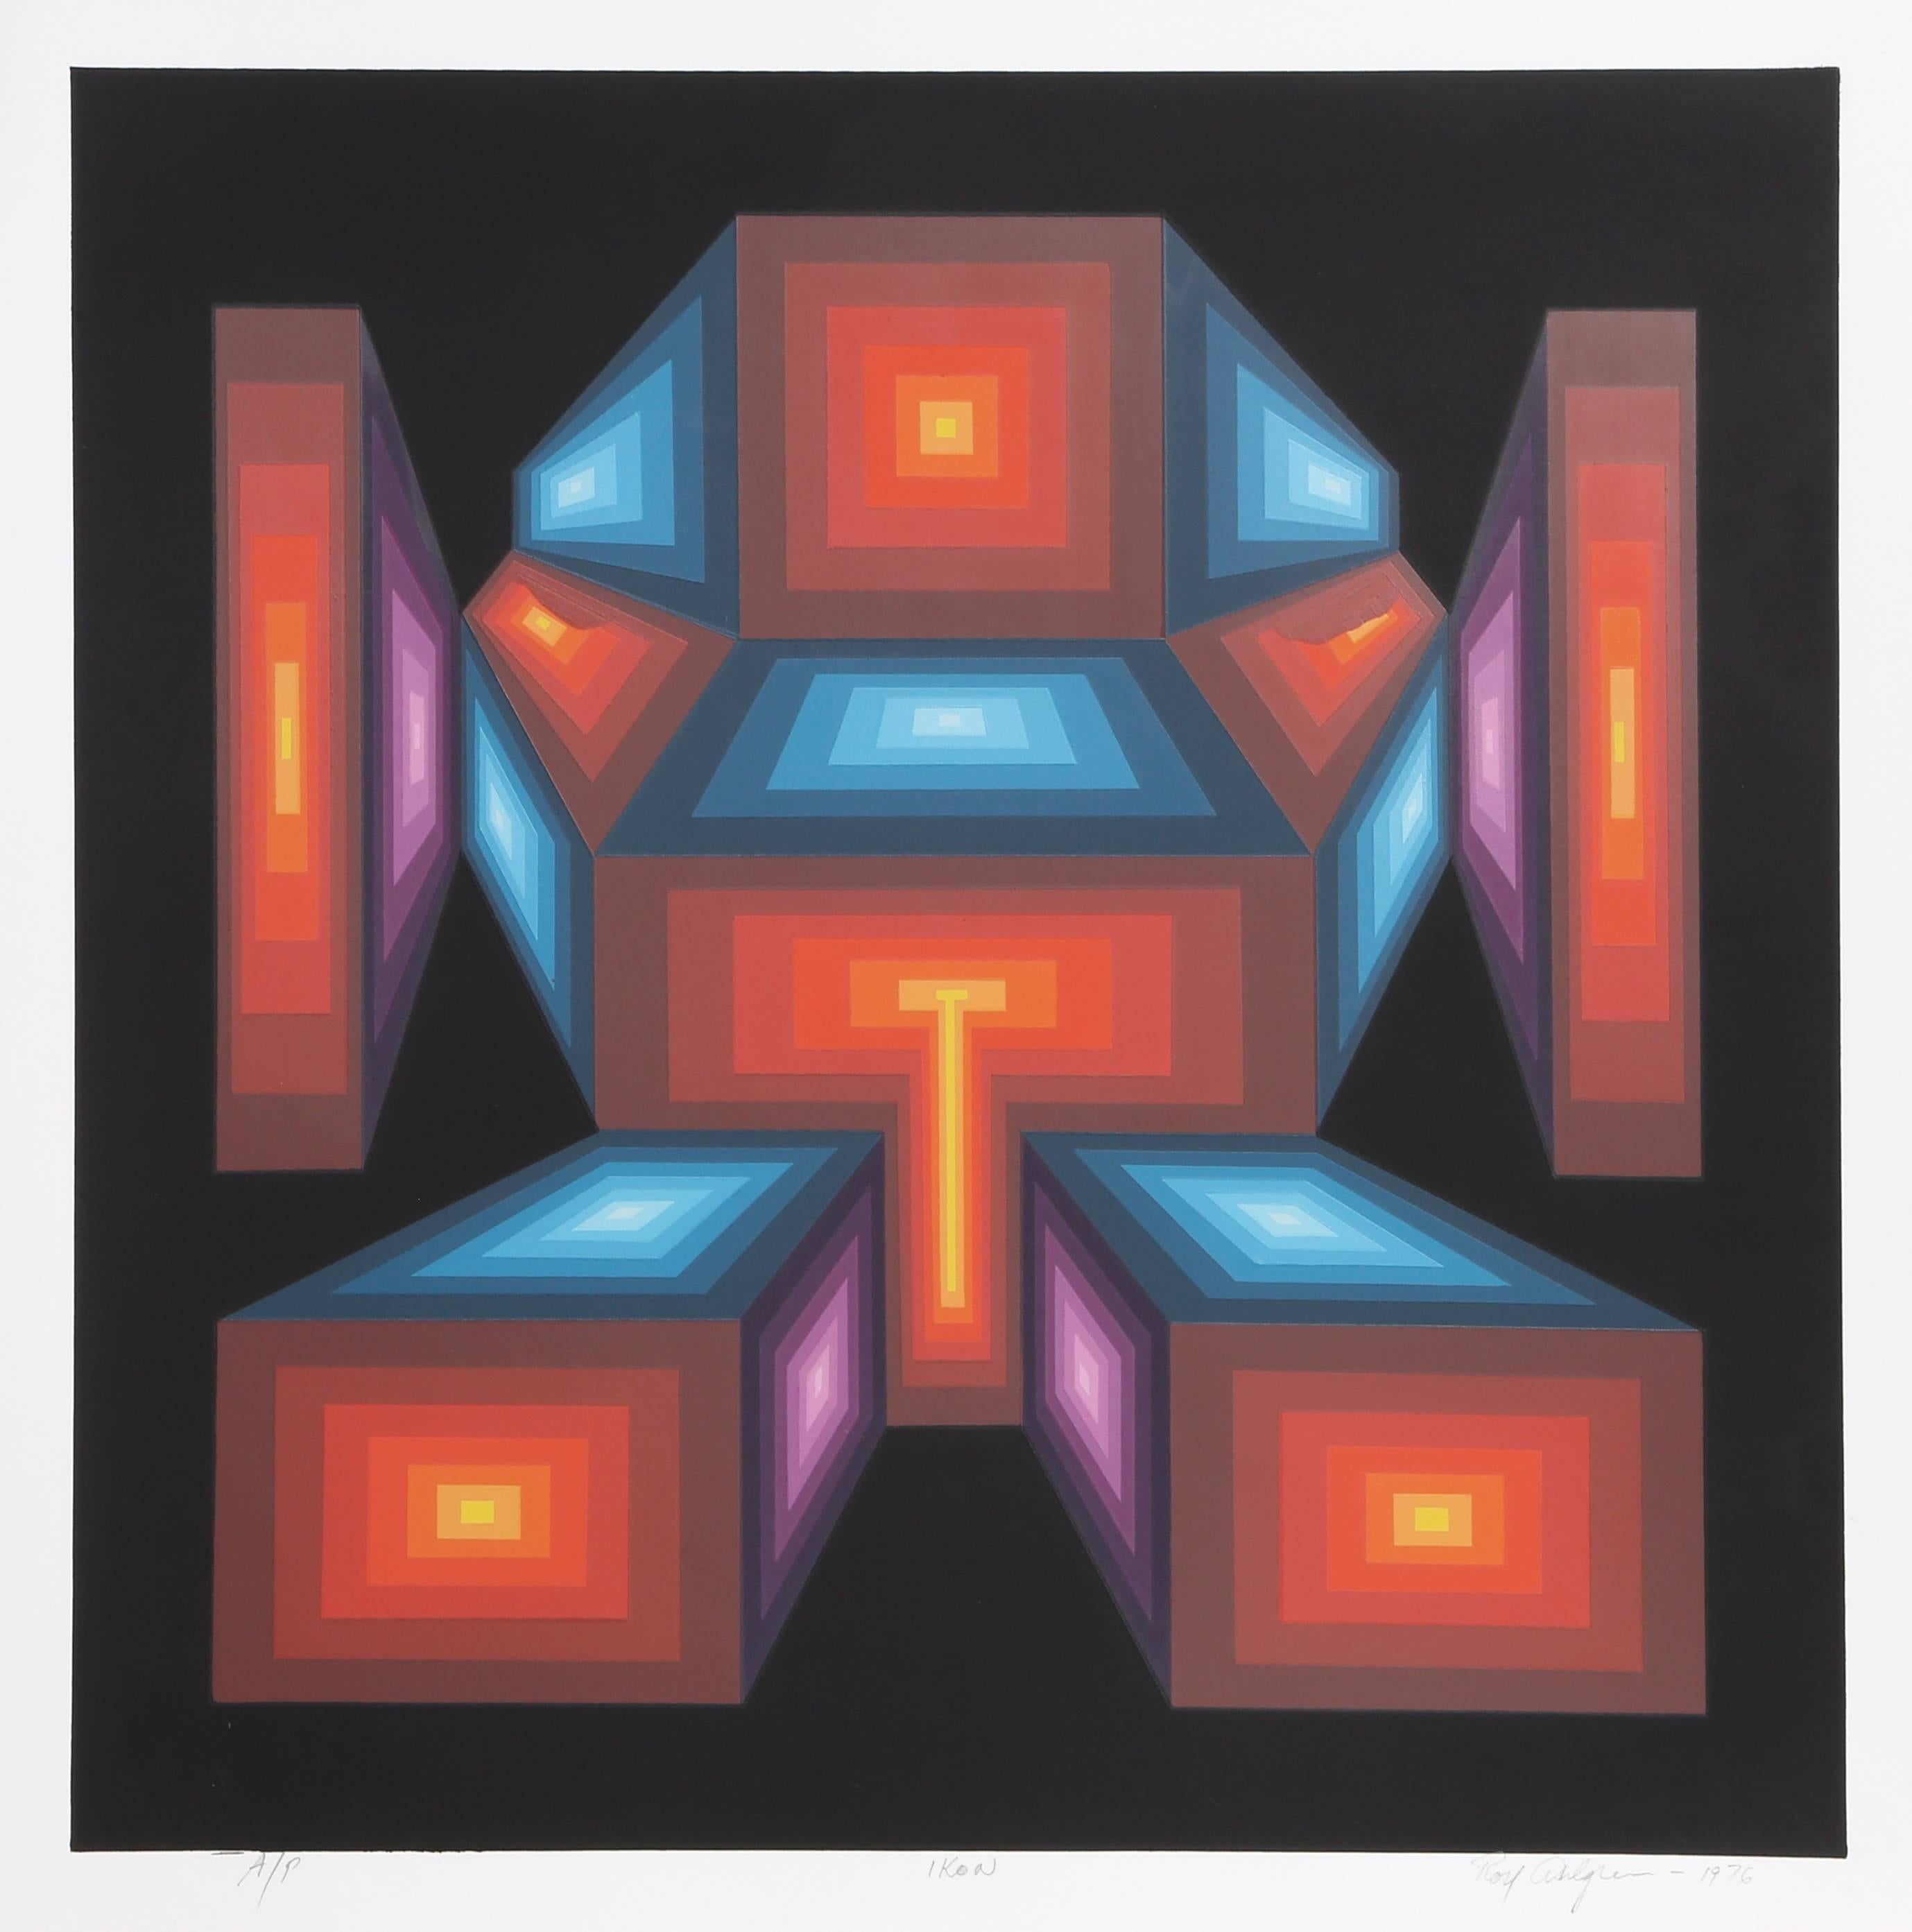 Artist: Roy Ahlgren, American (1927 - 2011)
Title: Ikon
Year: 1976
Medium: Serigraph, signed and numbered in pencil
Image Size: 17 x 17 inches
Size: 20 x 20 in. (50.8 x 50.8 cm)